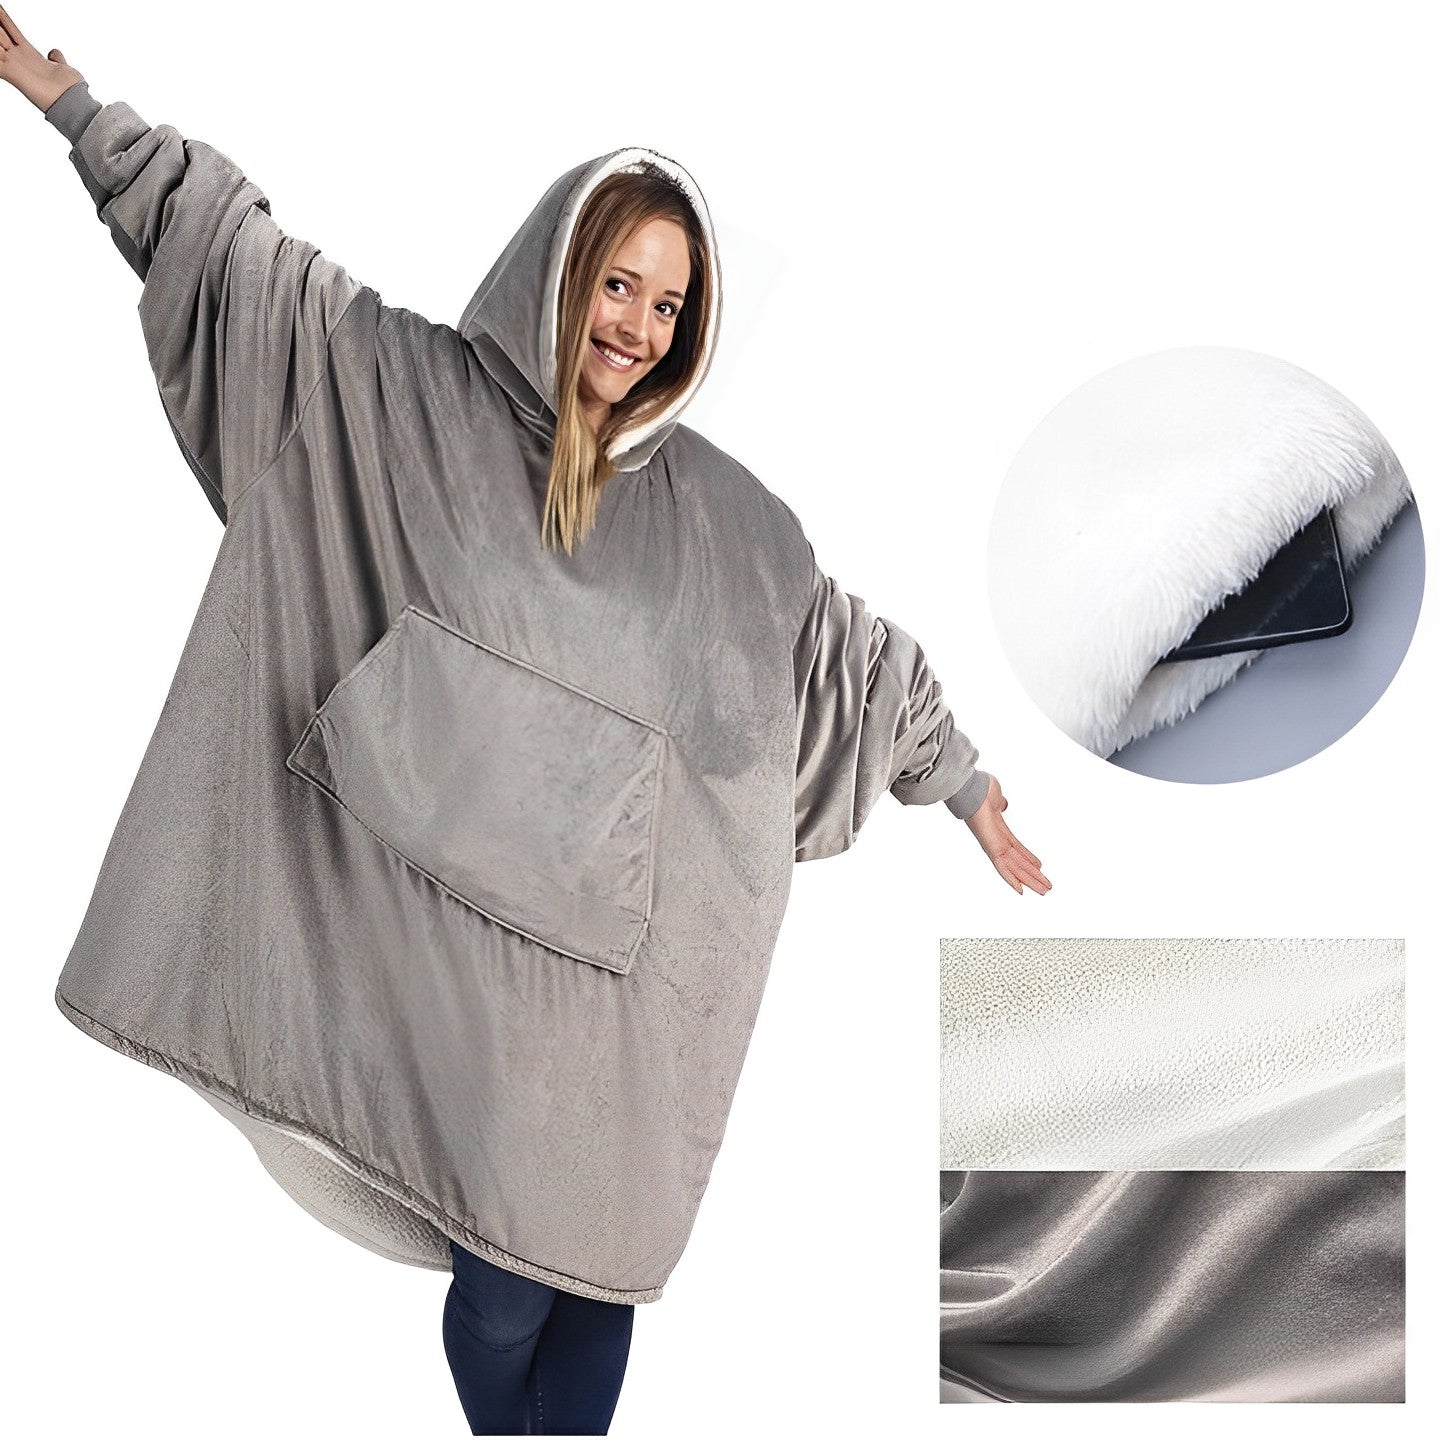 Reversible Hoodie Blanket- One Size Fits All